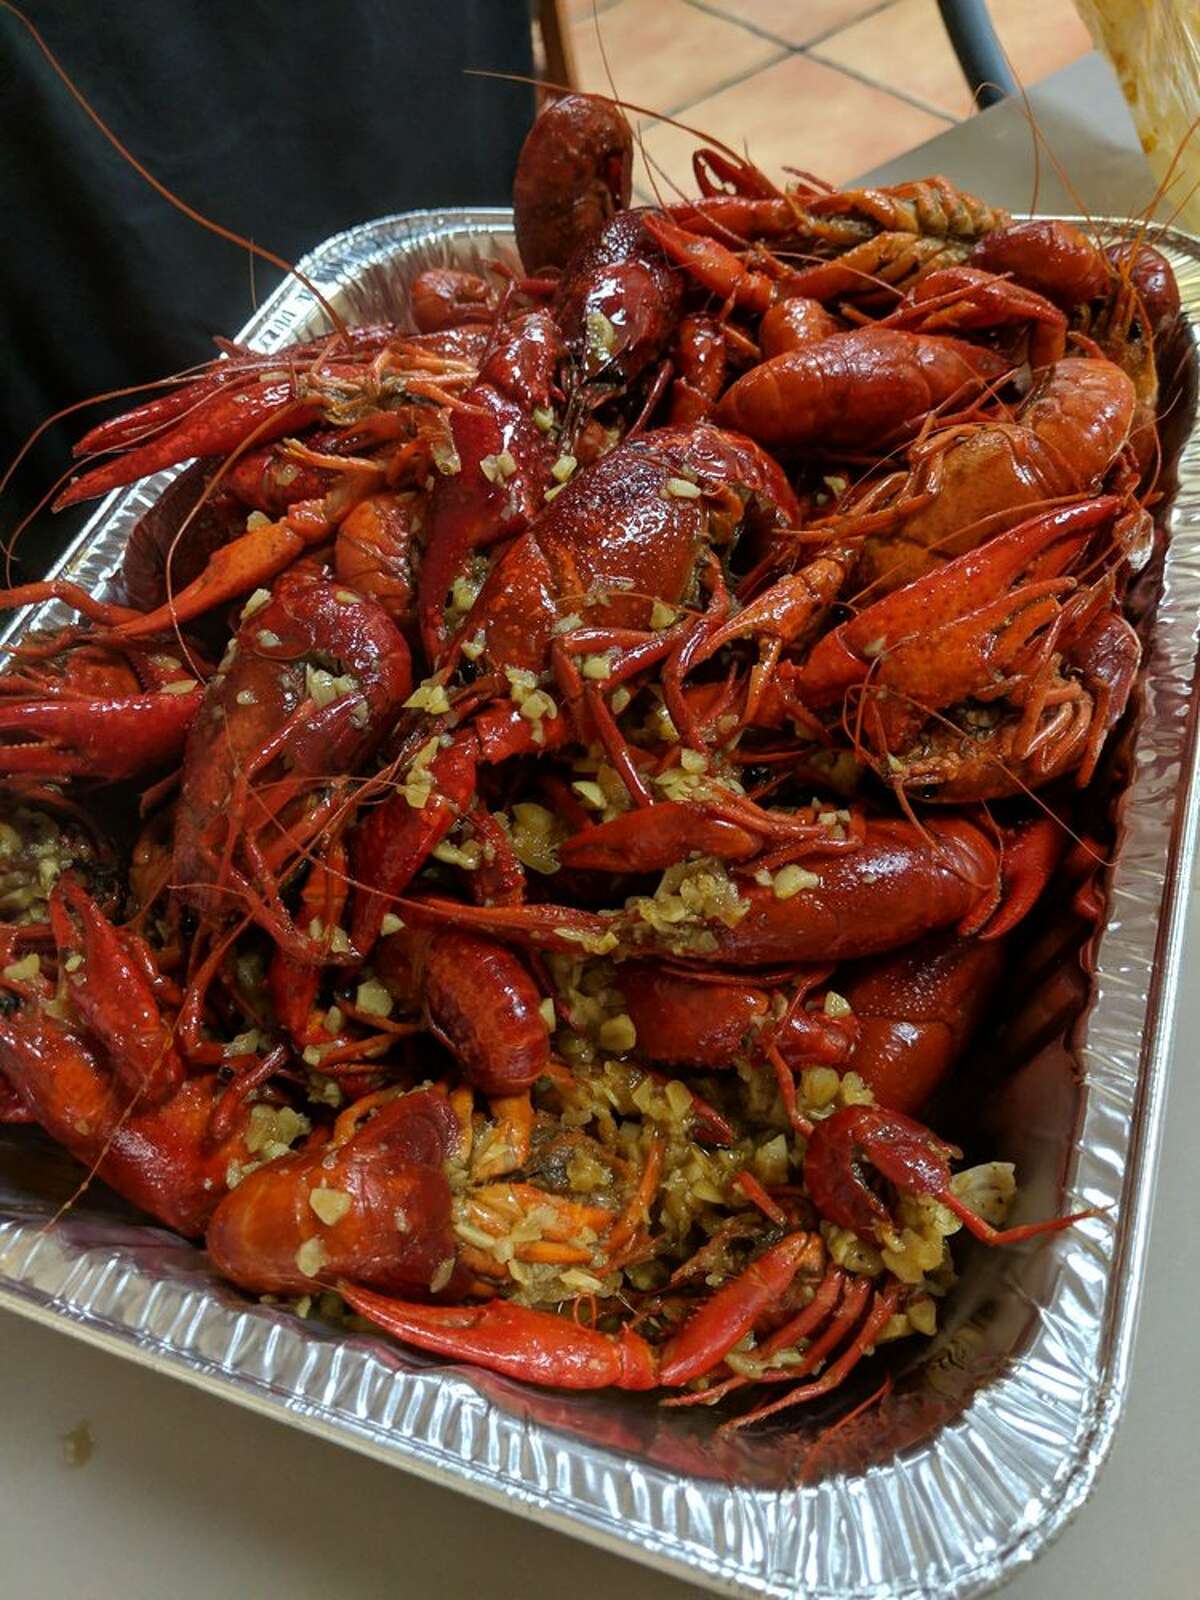 21 crawfish deals at top-rated Houston spots for the 2020 season